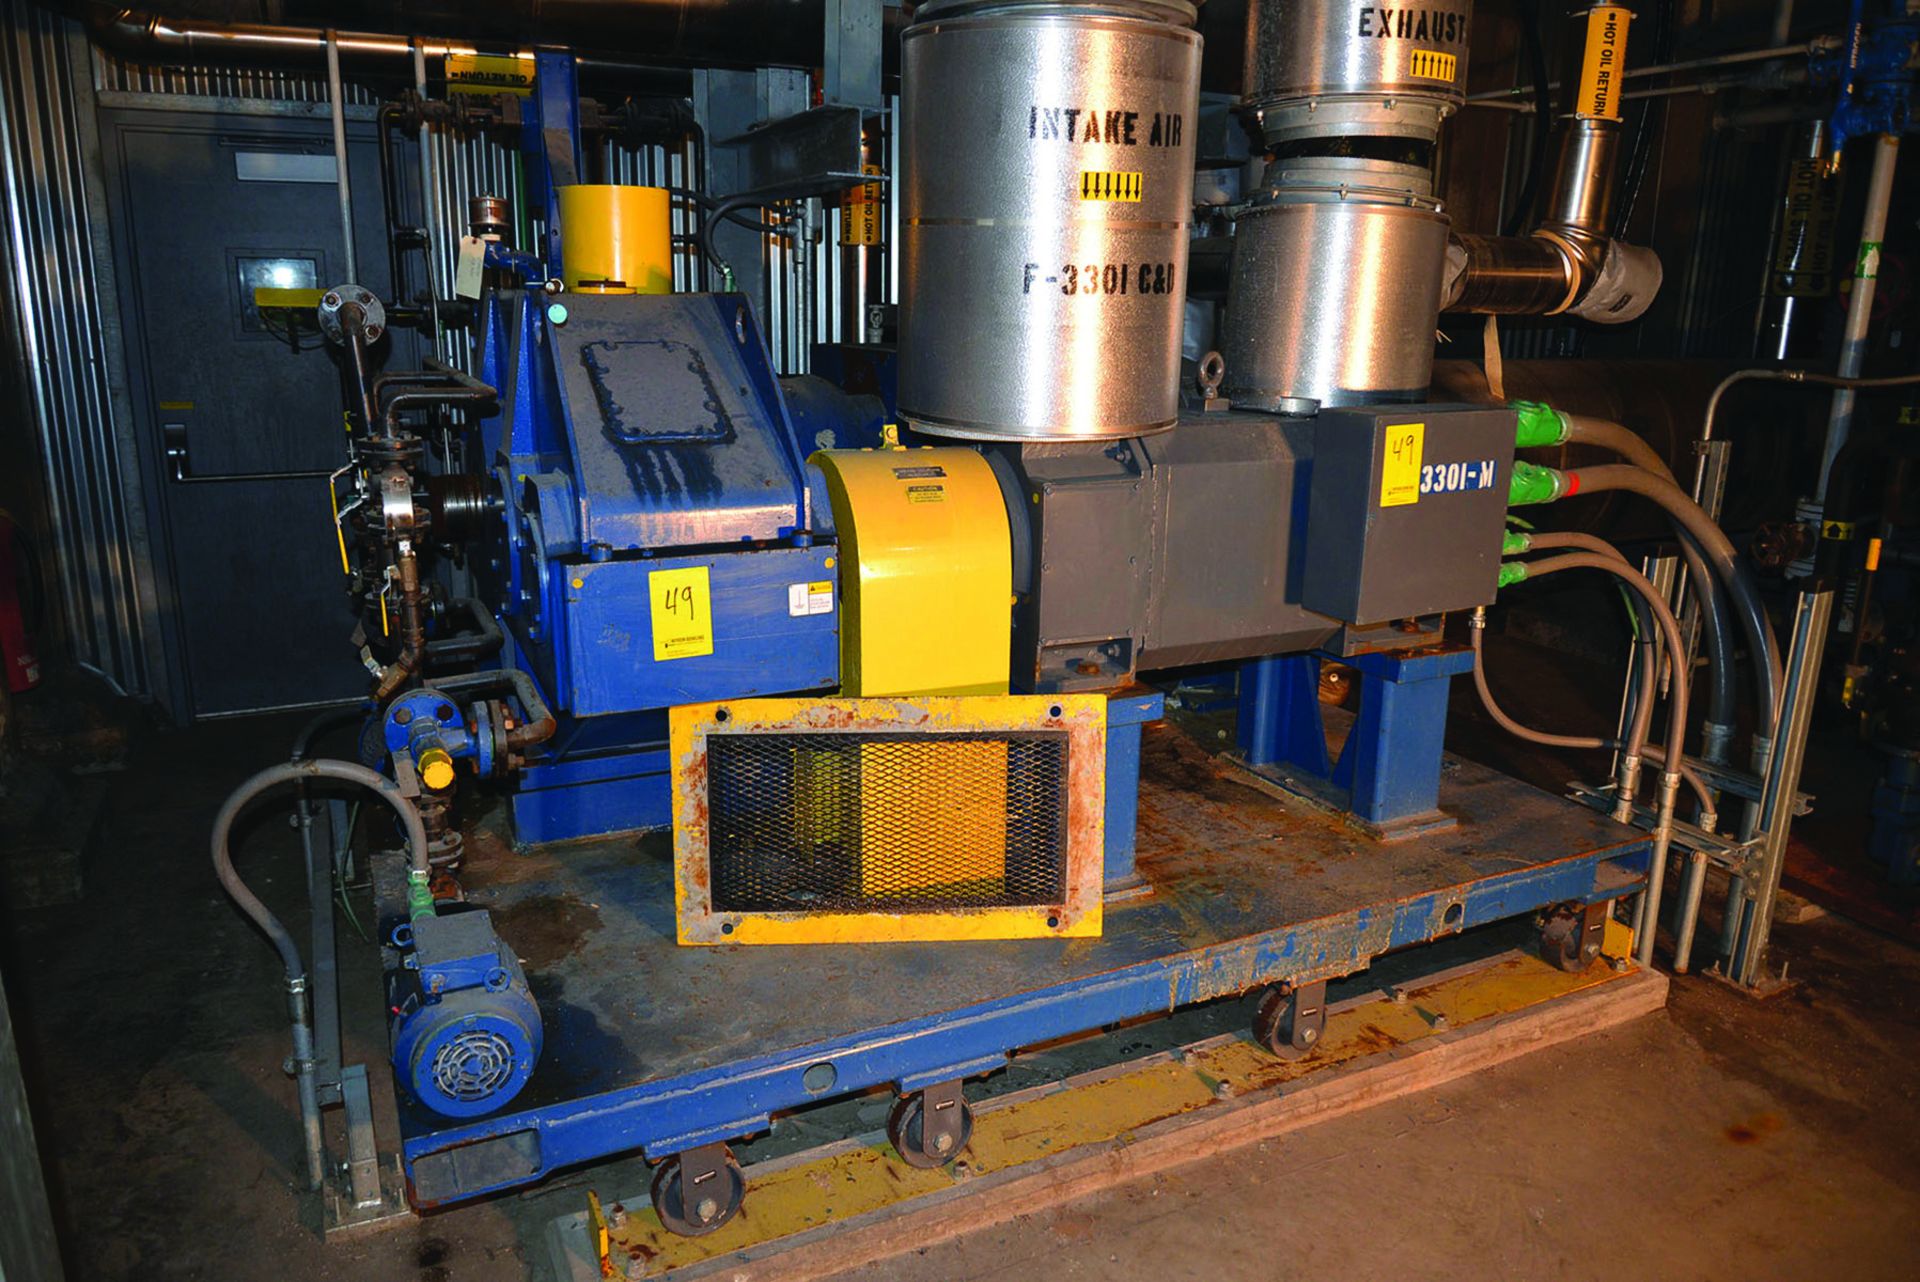 NFM 12" SINGLE SCREW EXTRUDER, APPROX. 24 TO 1 L/D RATIO***Subject to Bulk Sale Lot 49B*** - Image 3 of 17